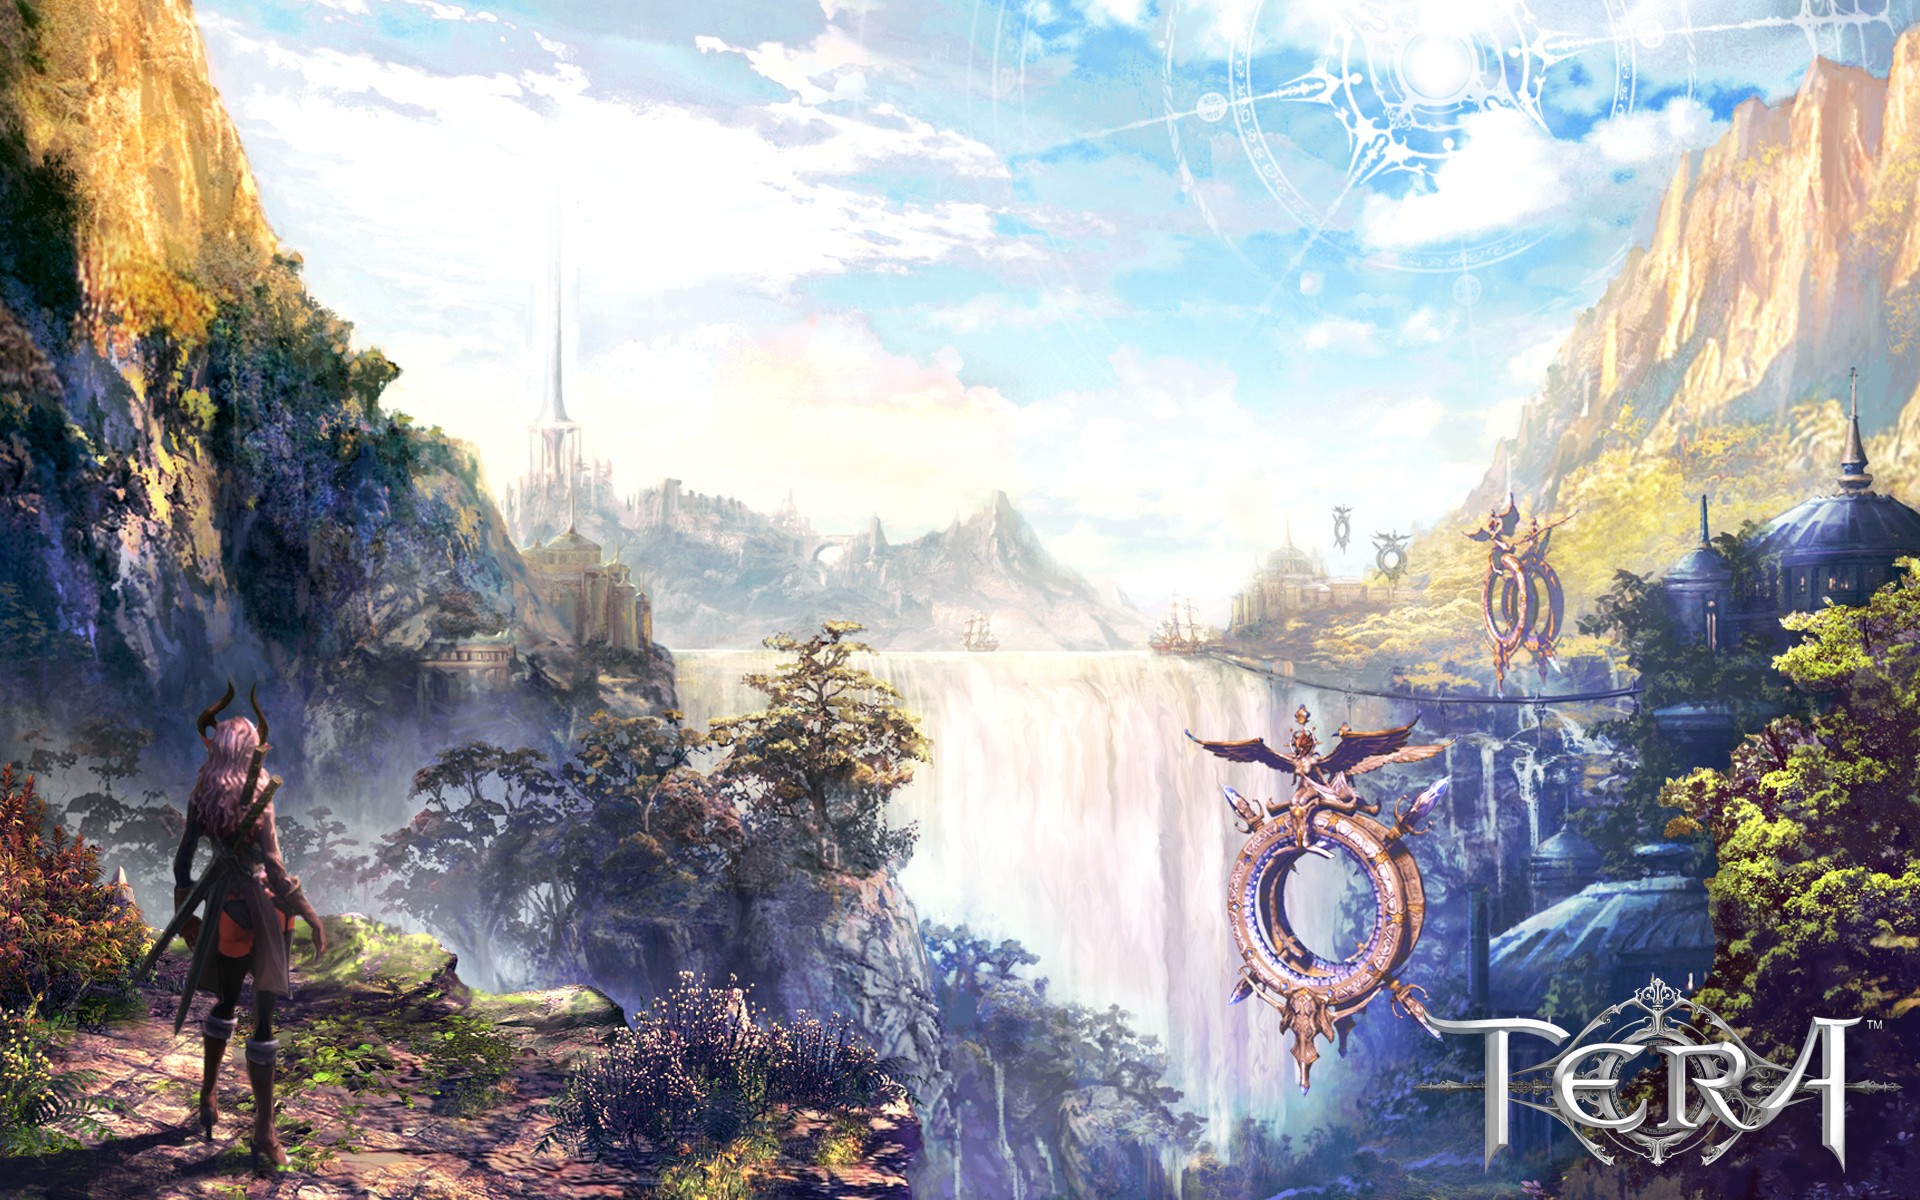 General 1920x1200 Tera Tera online PC gaming fantasy art sky video game landscape digital art video games video game art standing video game girls clouds looking into the distance title water waterfall